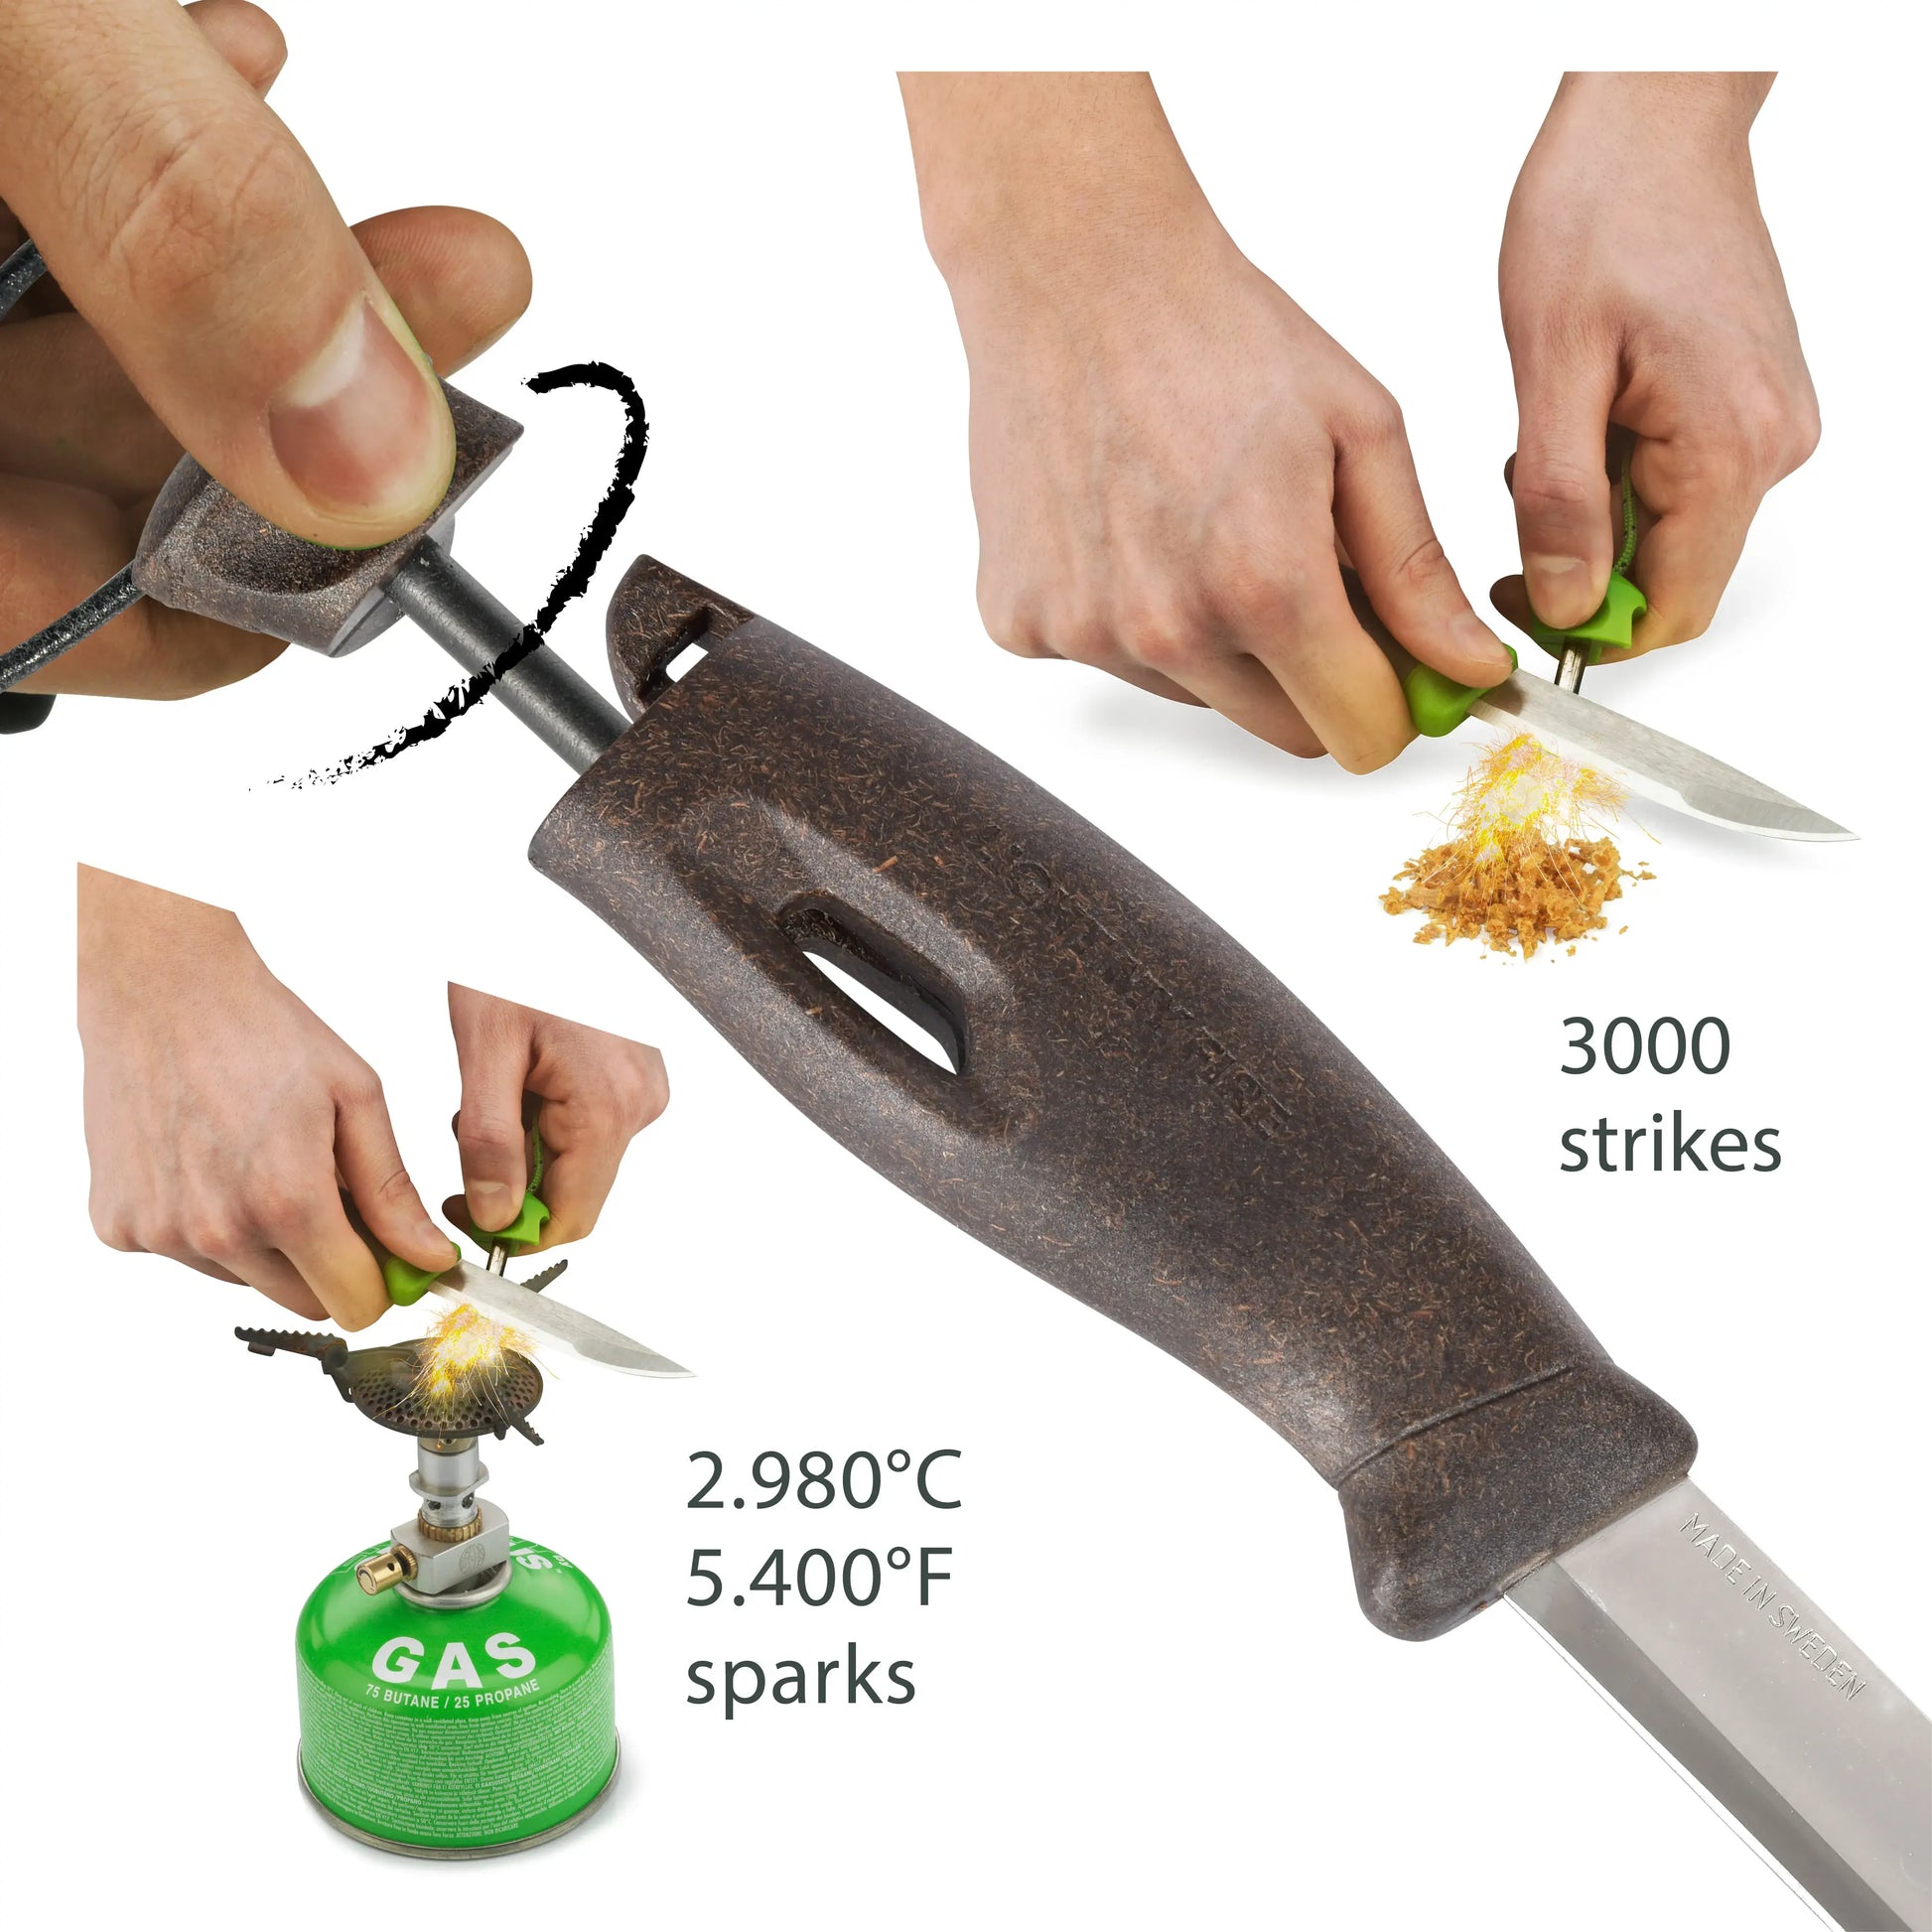 Steps to making sparks with knife and ferro rod.